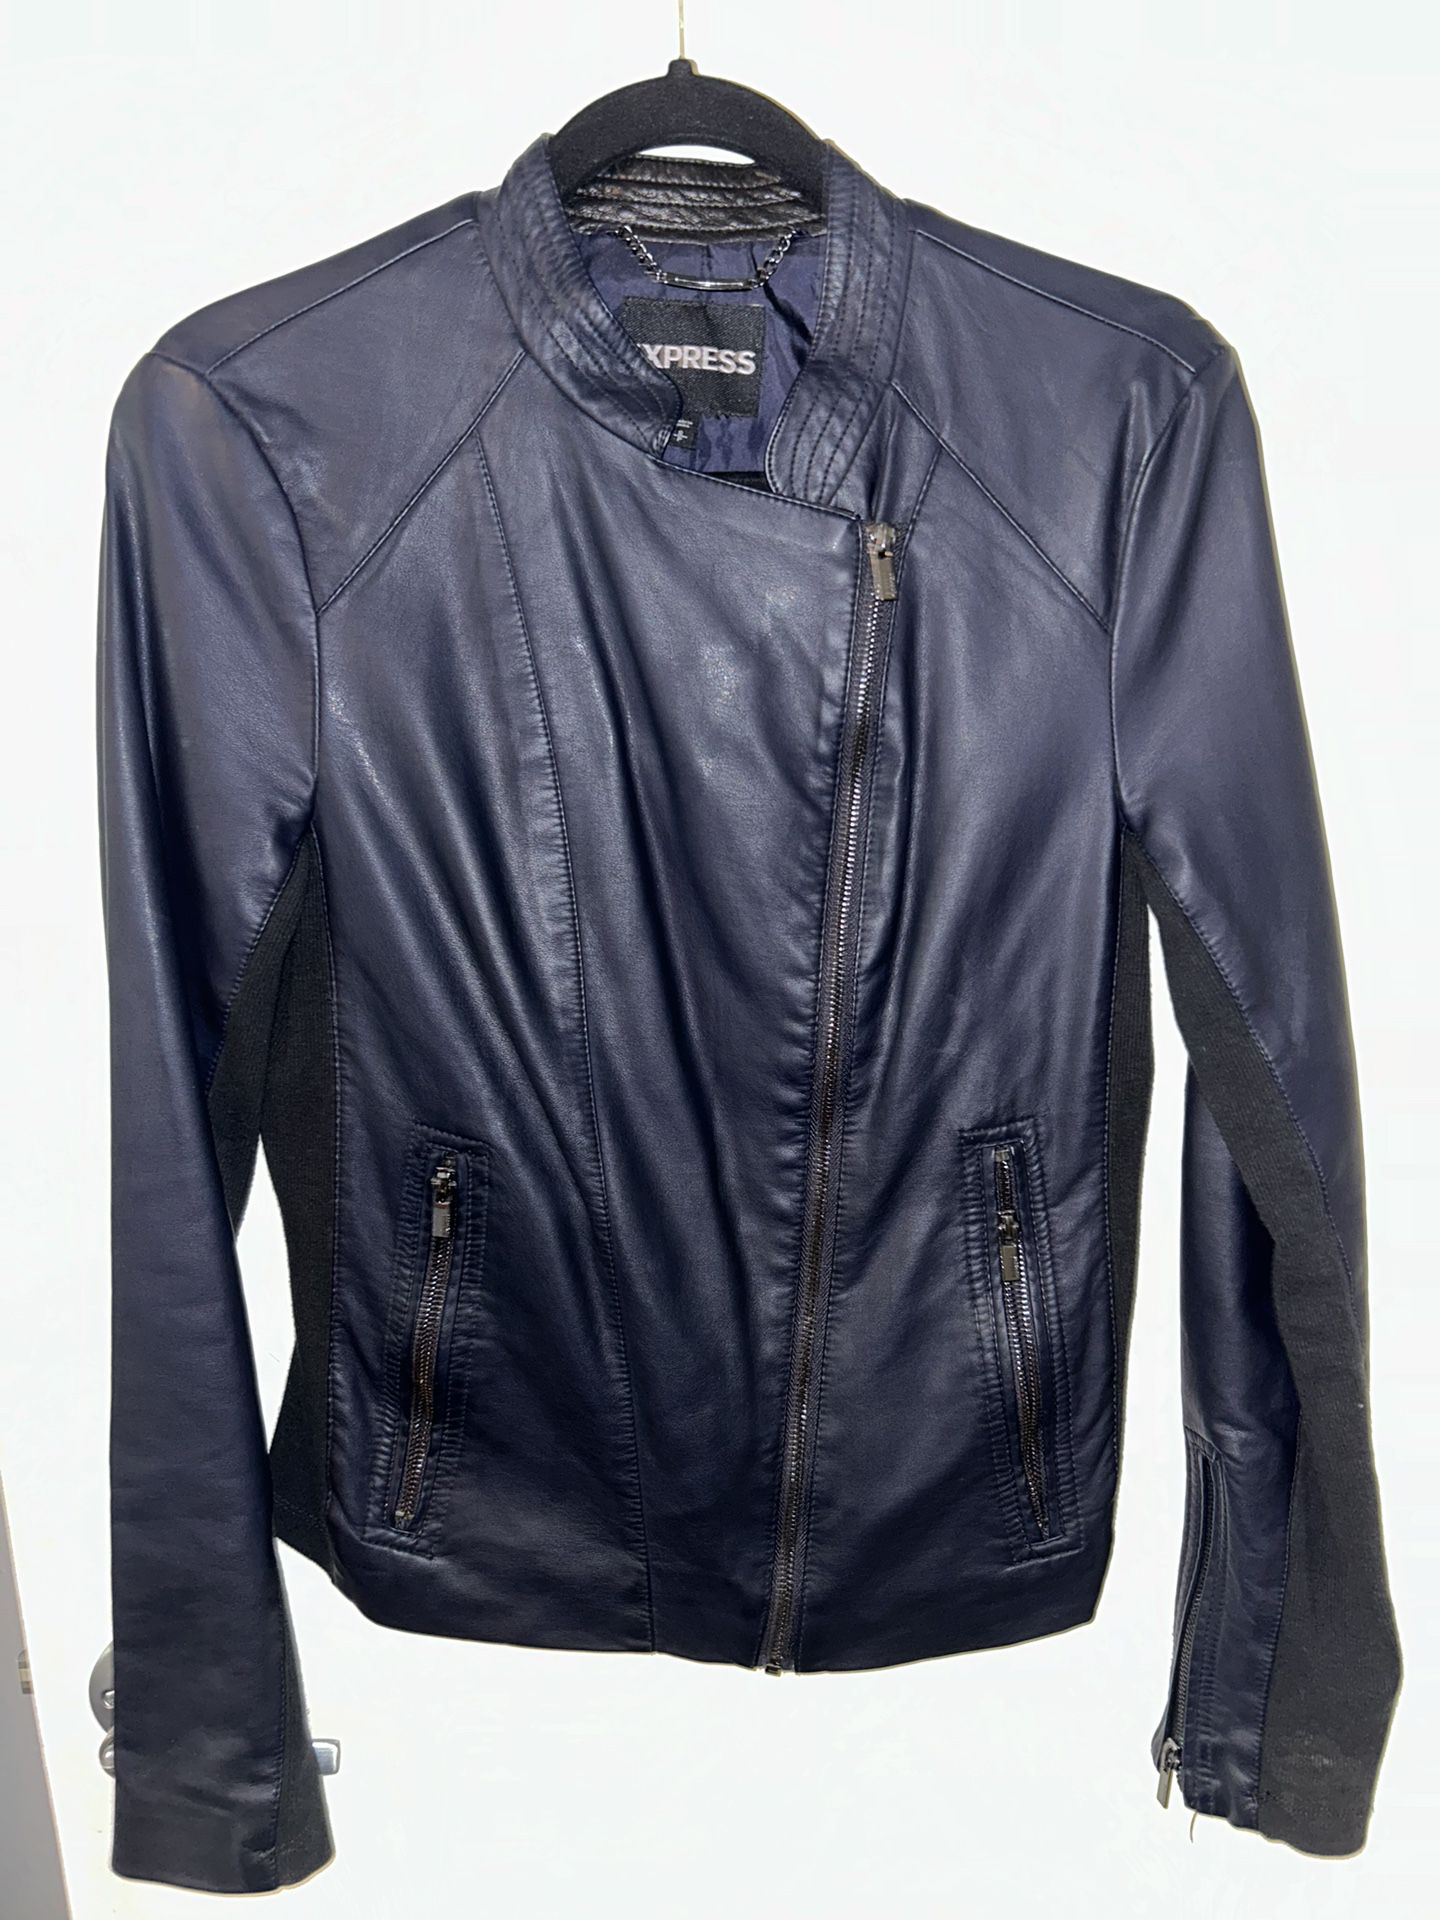 Express Women's Leather Jacket Size Small